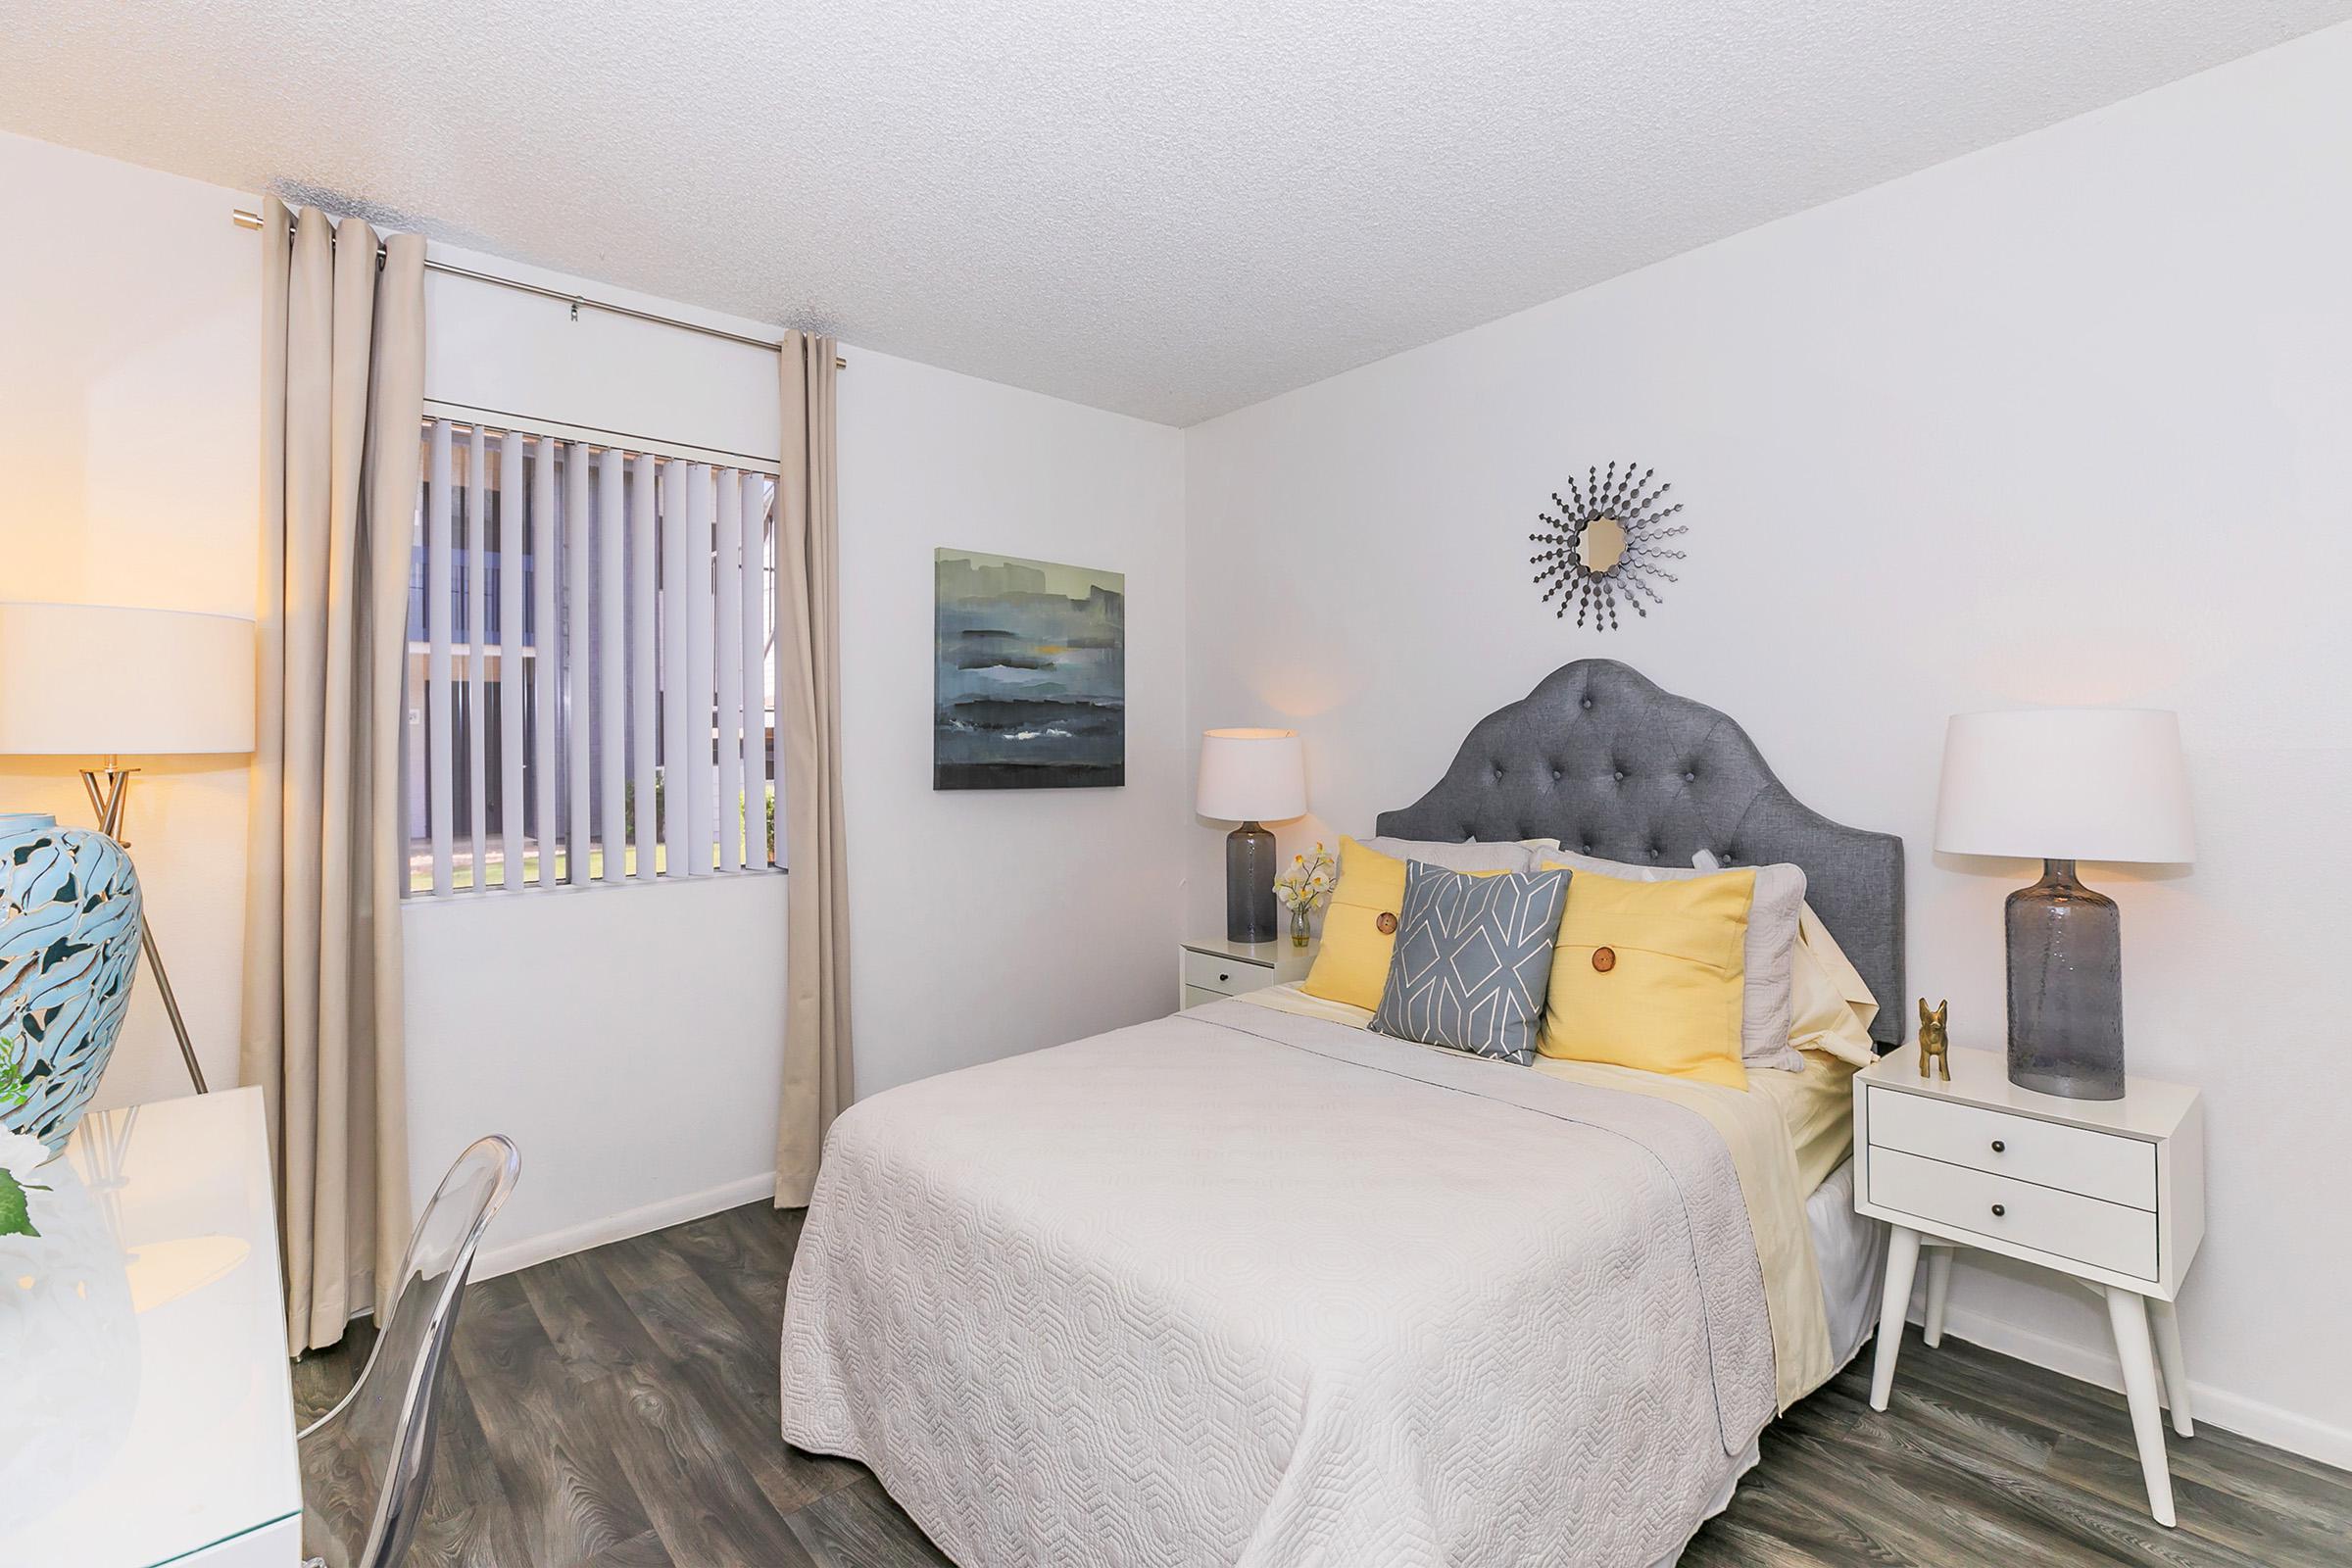 A queen bed in a bedroom with a window at Rise North Ridge.